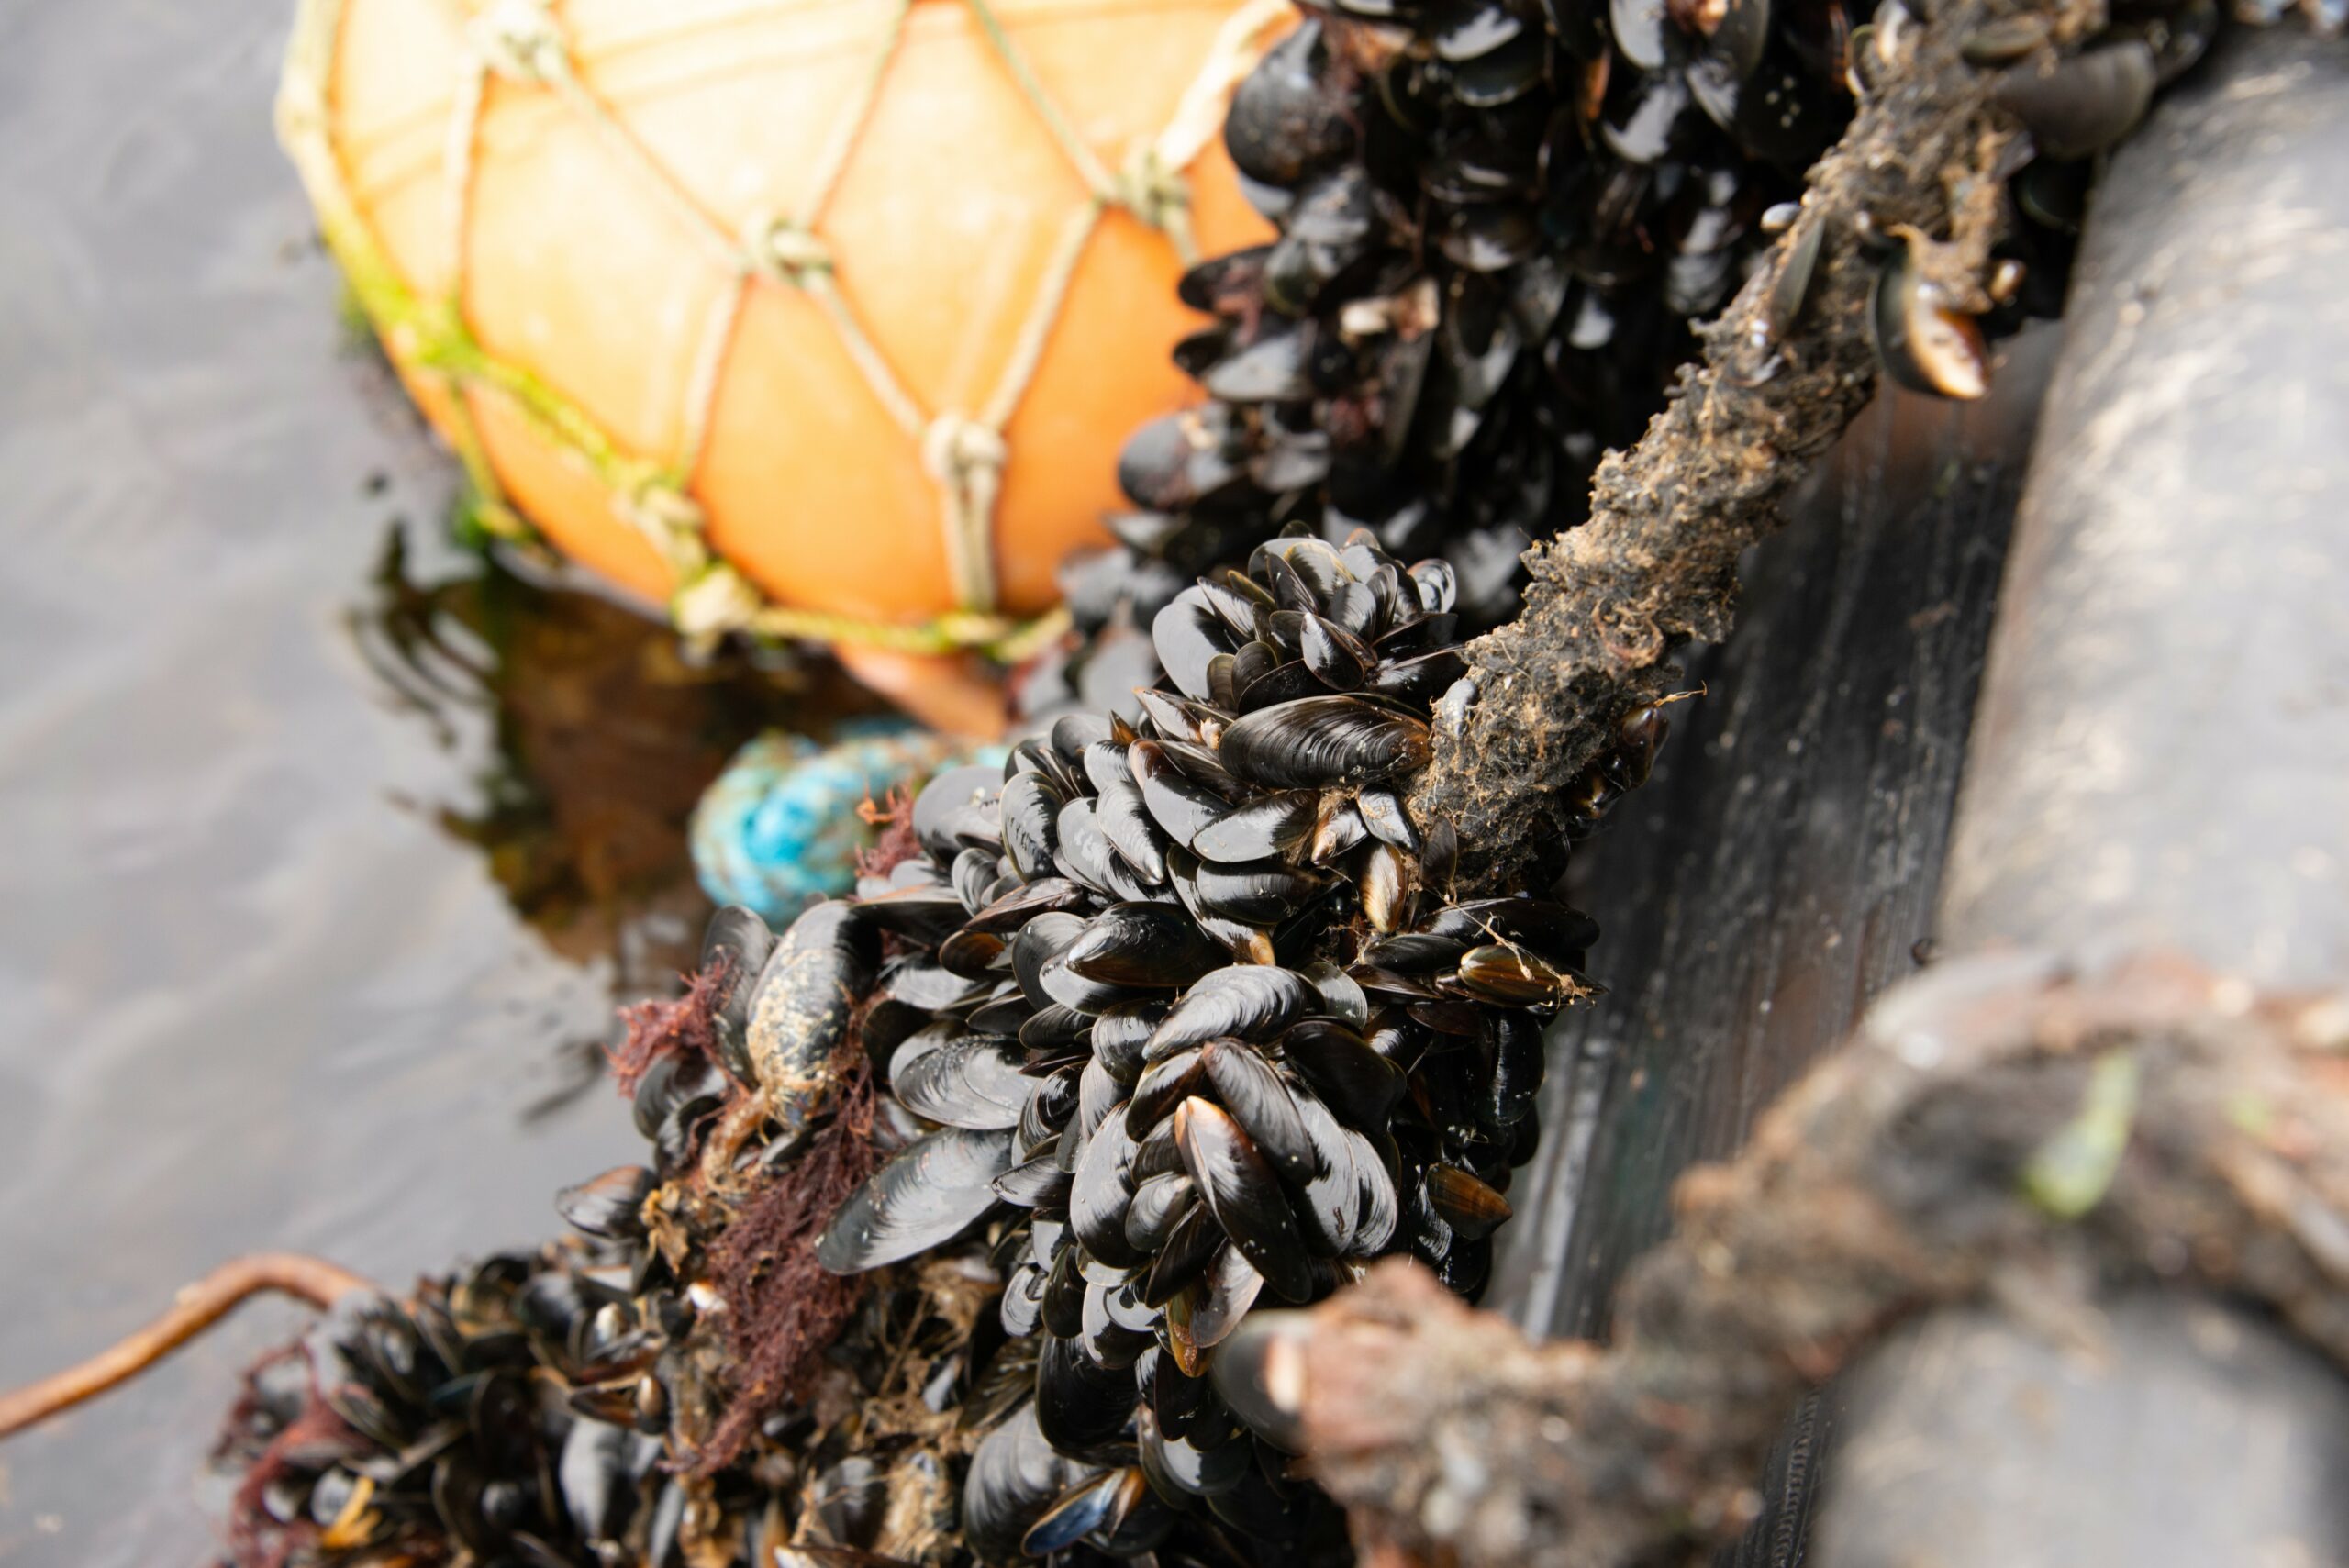 Mussels growing on a rope